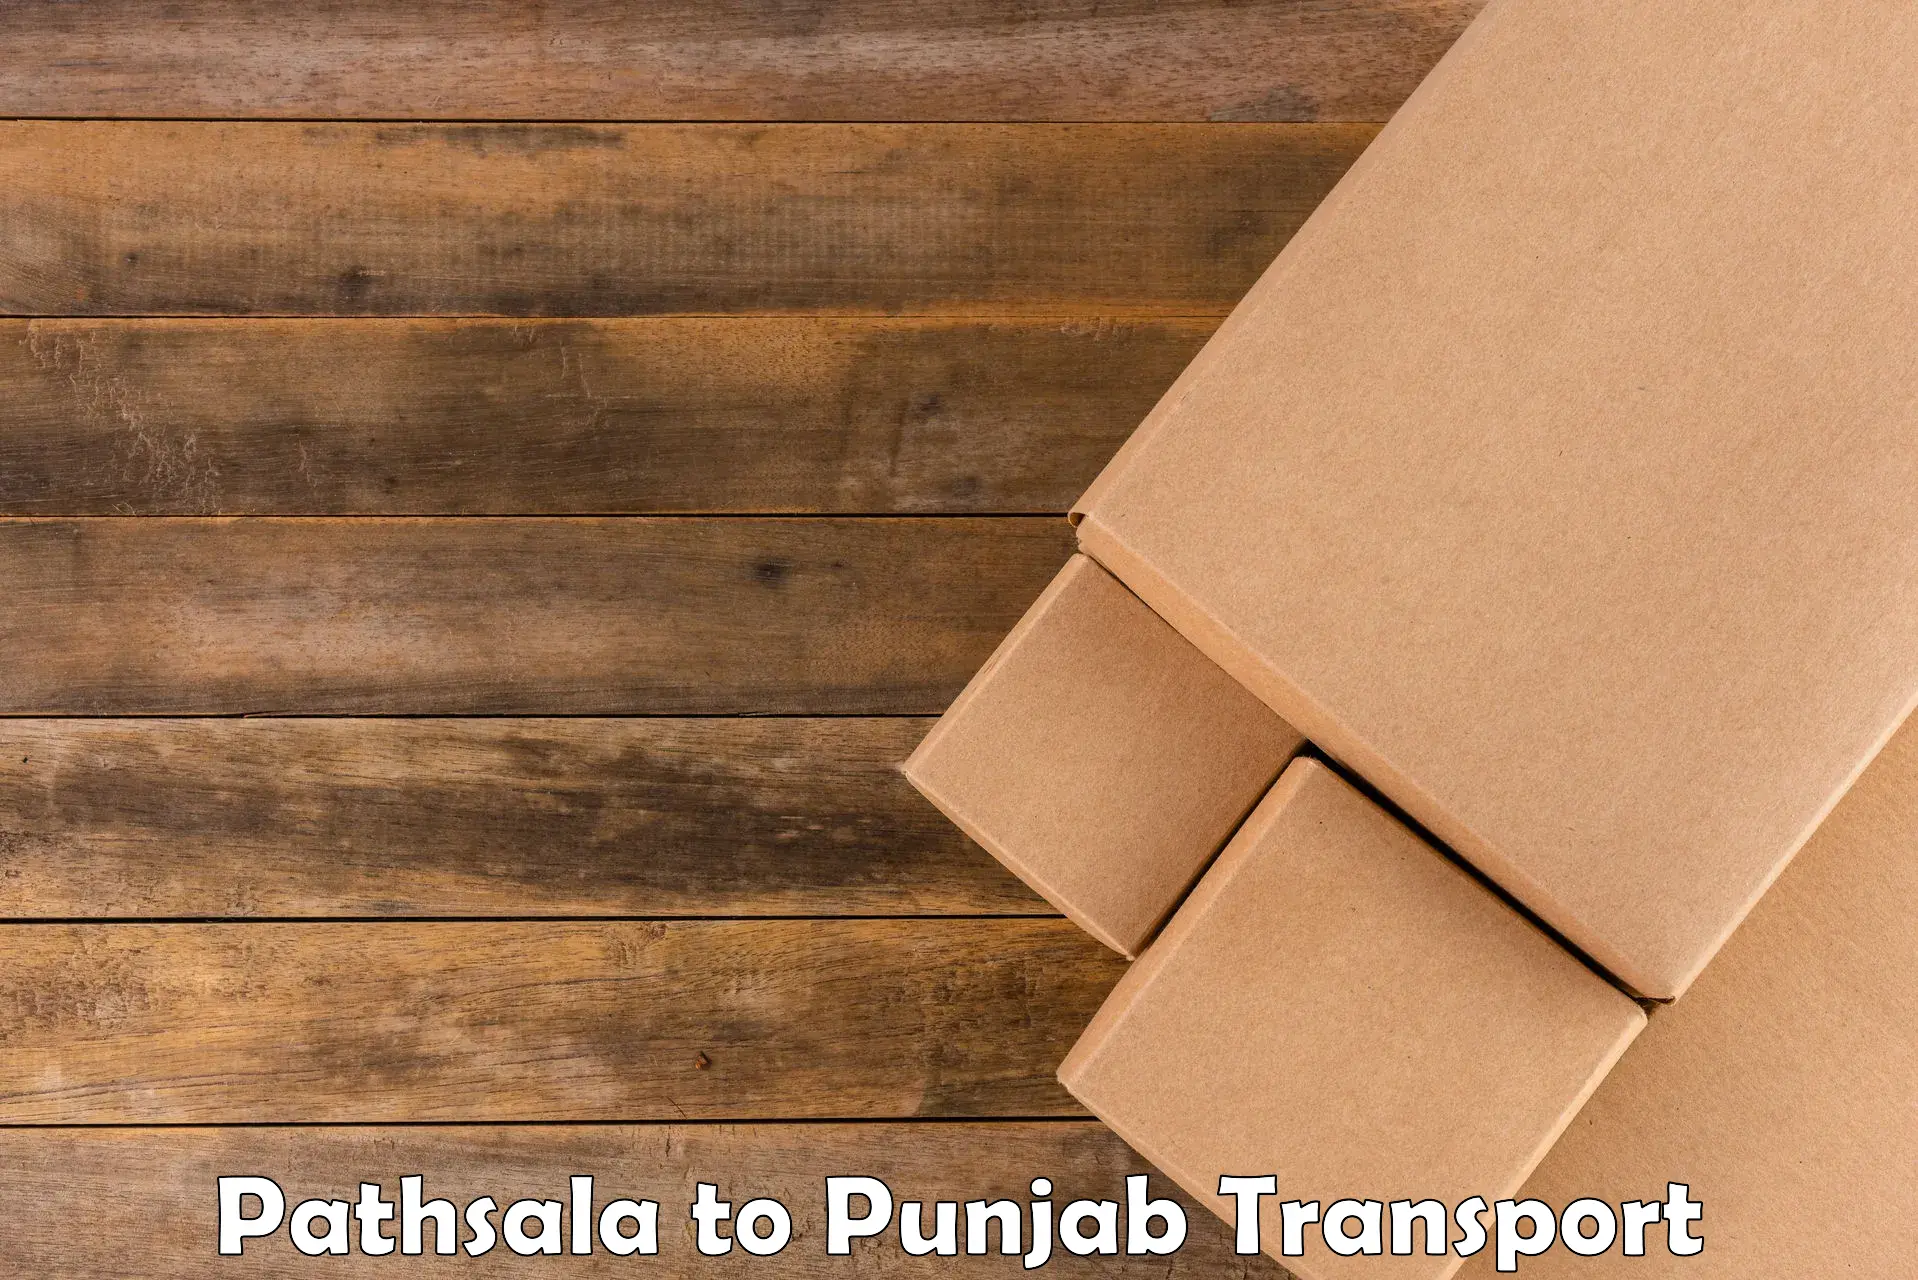 Vehicle transport services in Pathsala to Sirhind Fatehgarh